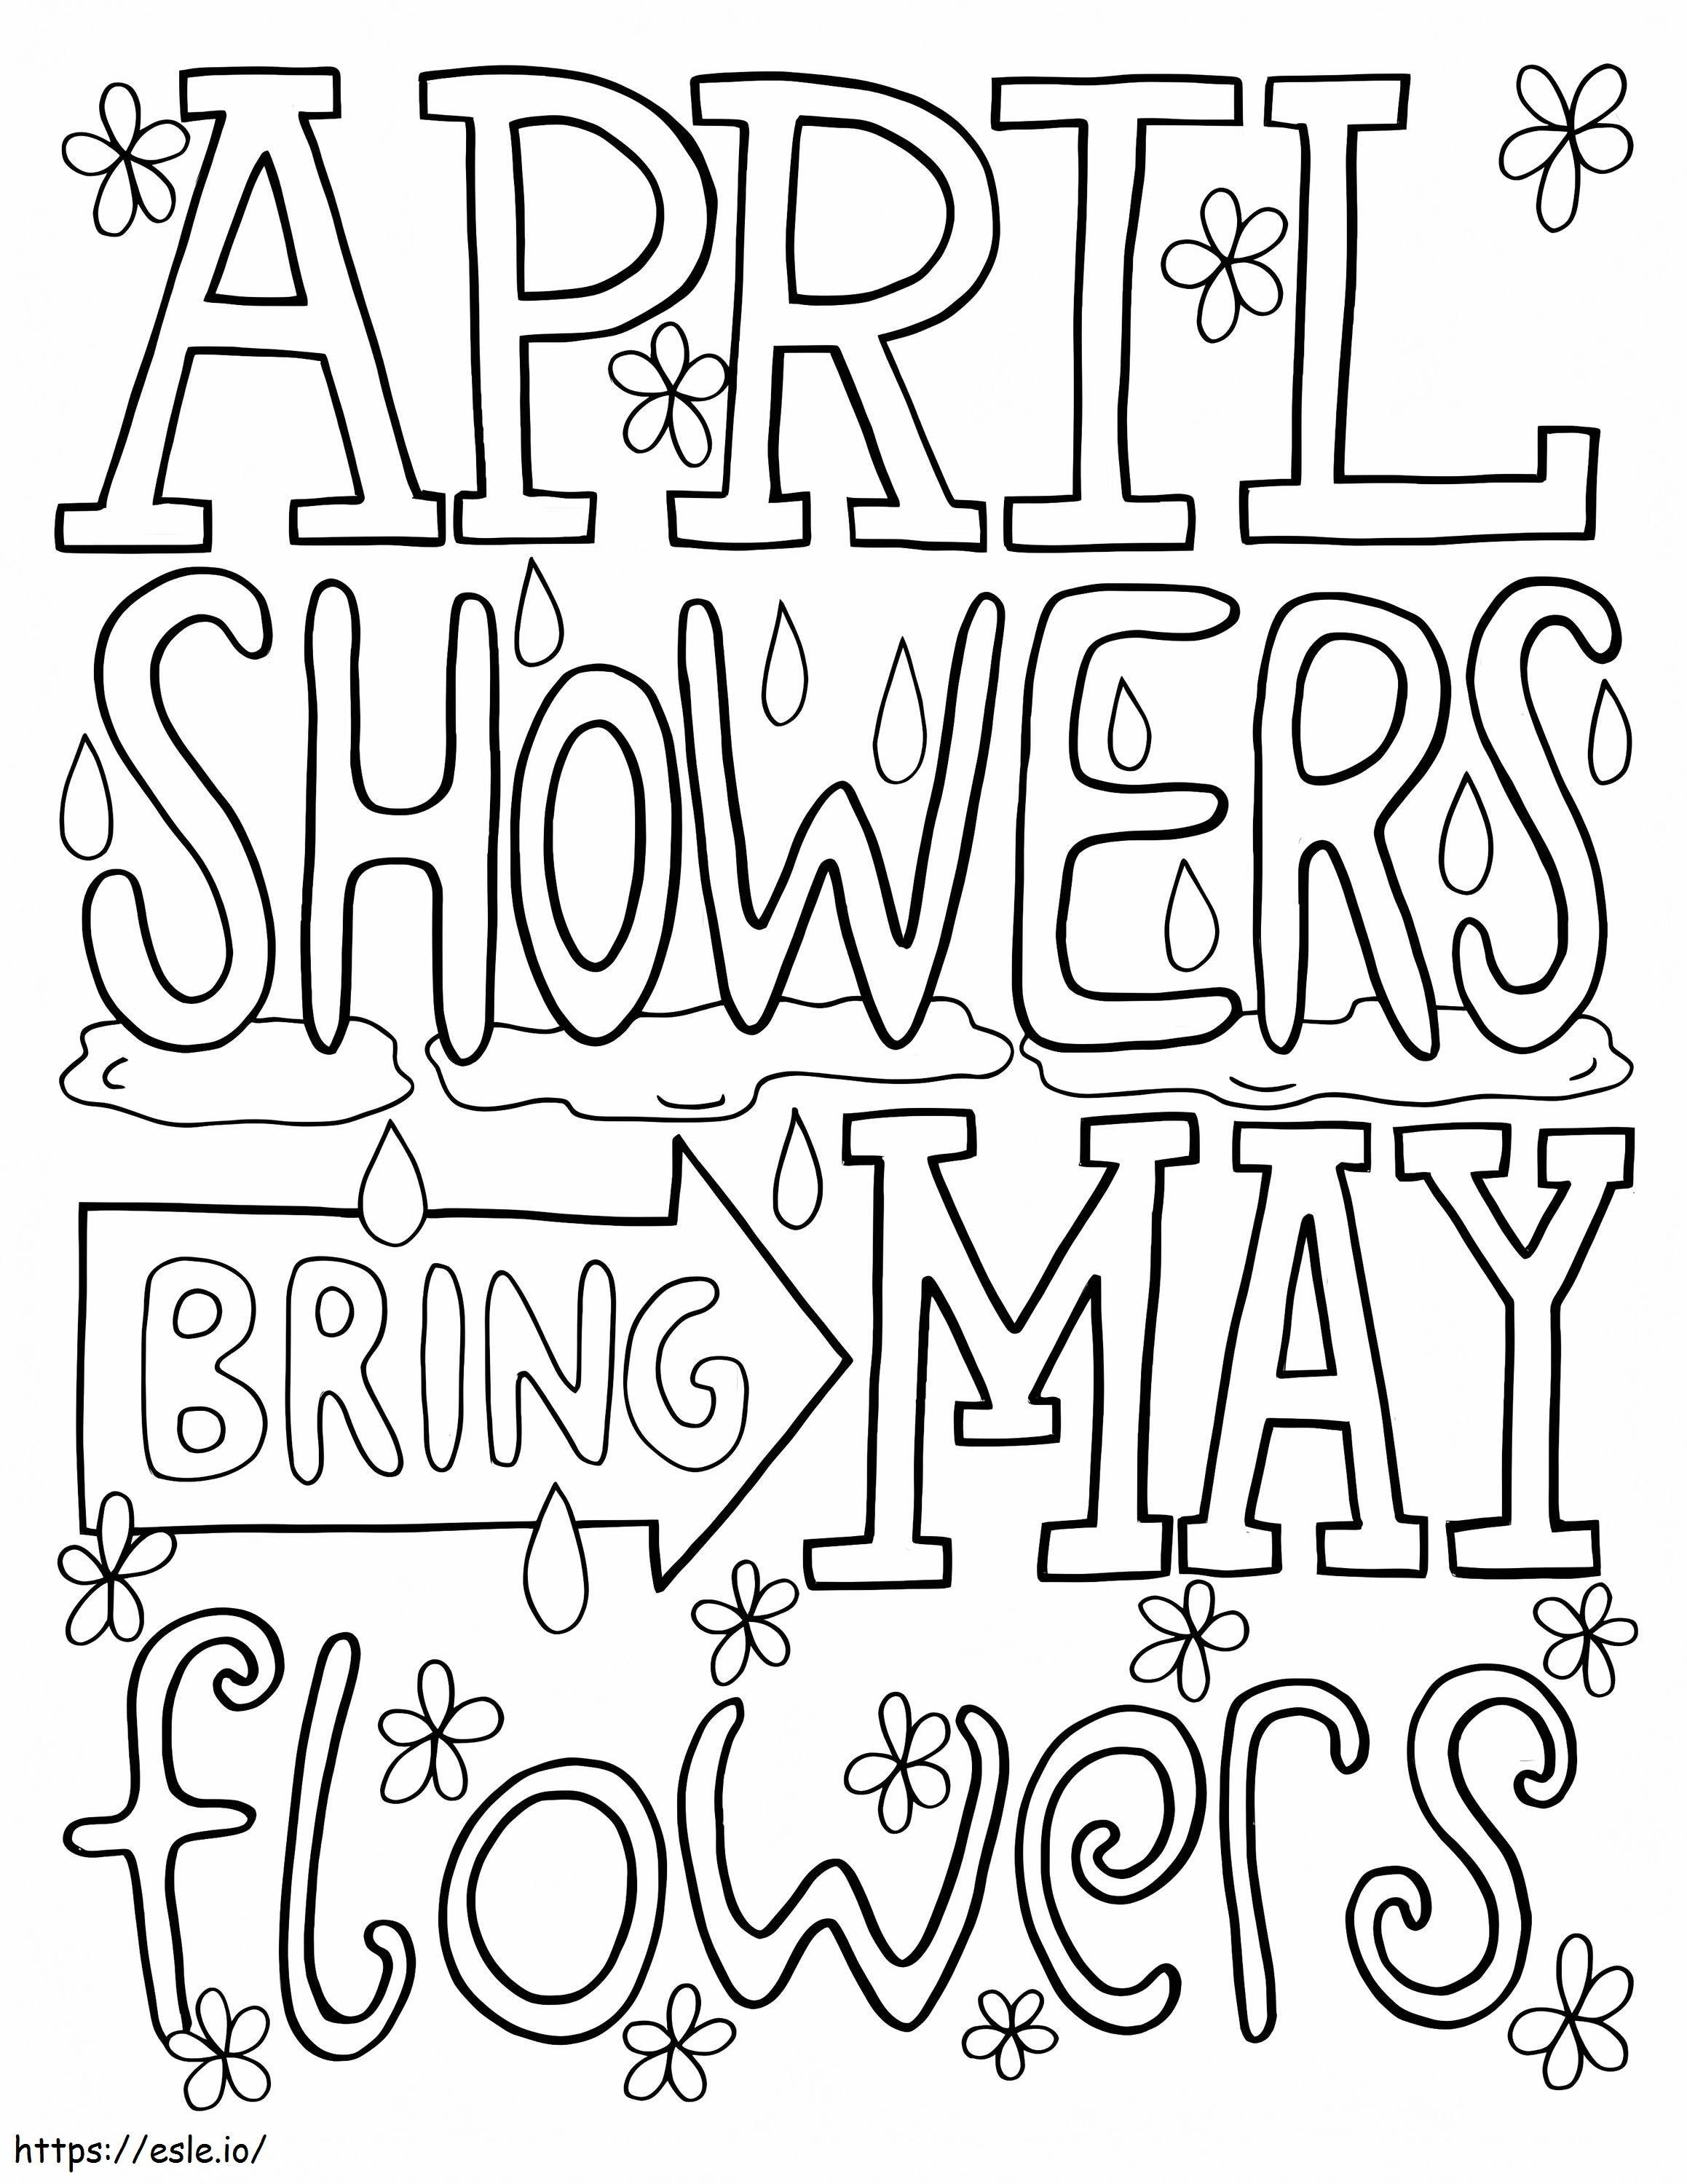 April Showers Bring May Flowers coloring page